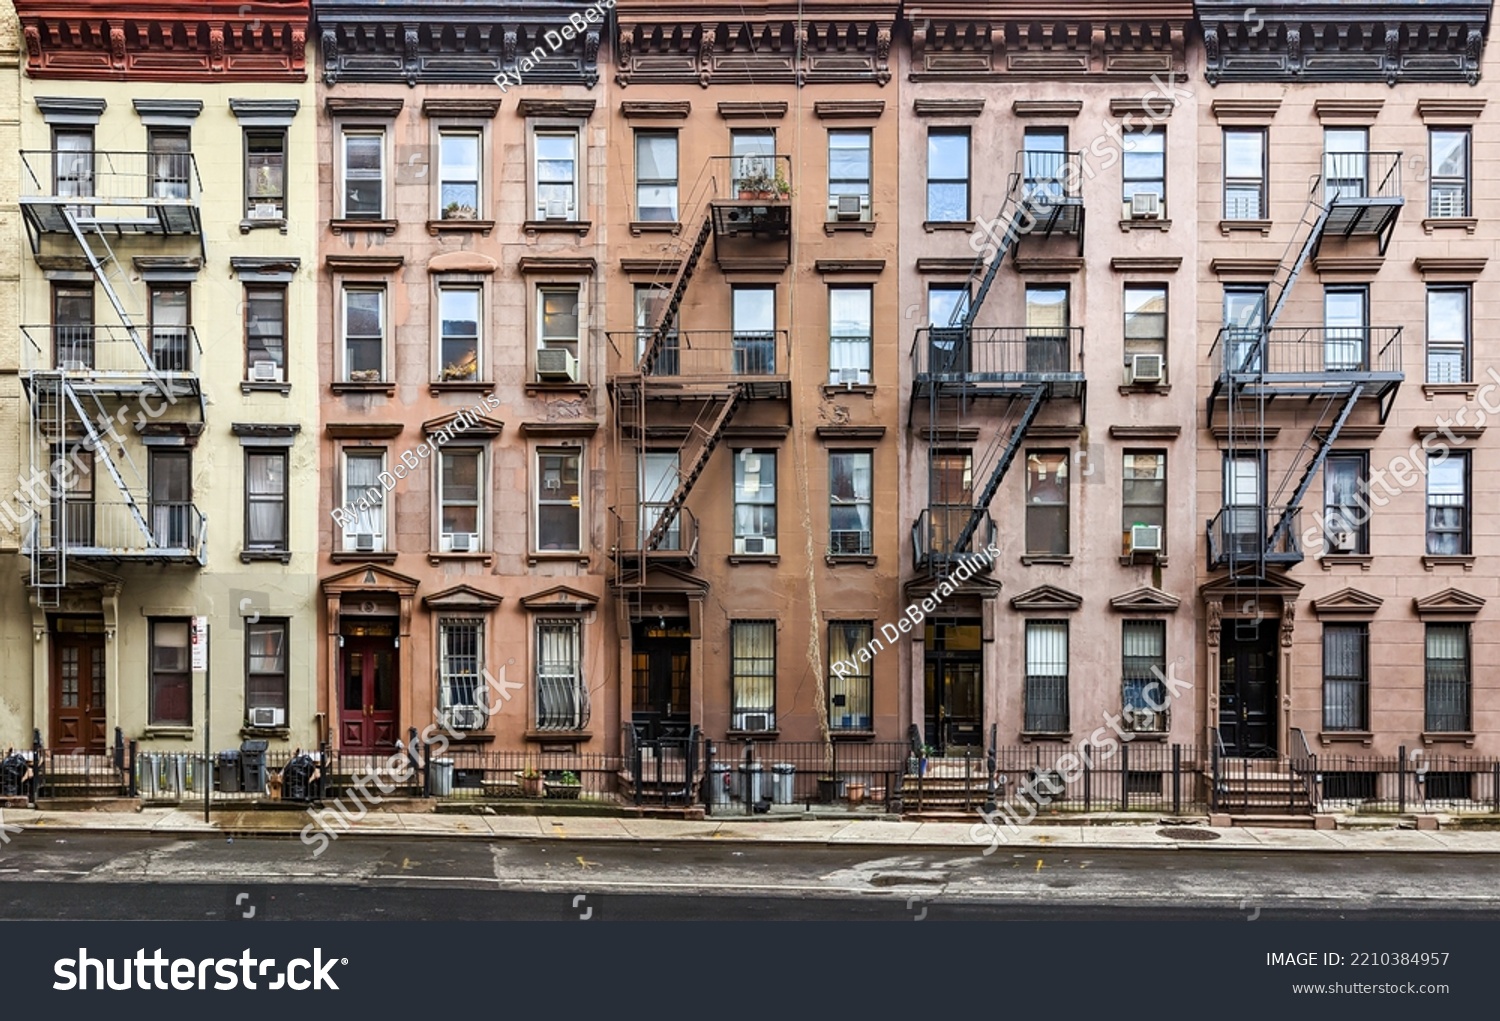 Block of historic apartment buildings crowded together on West 49th Street in the Hell's Kitchen neighborhood of New York City NYC #2210384957